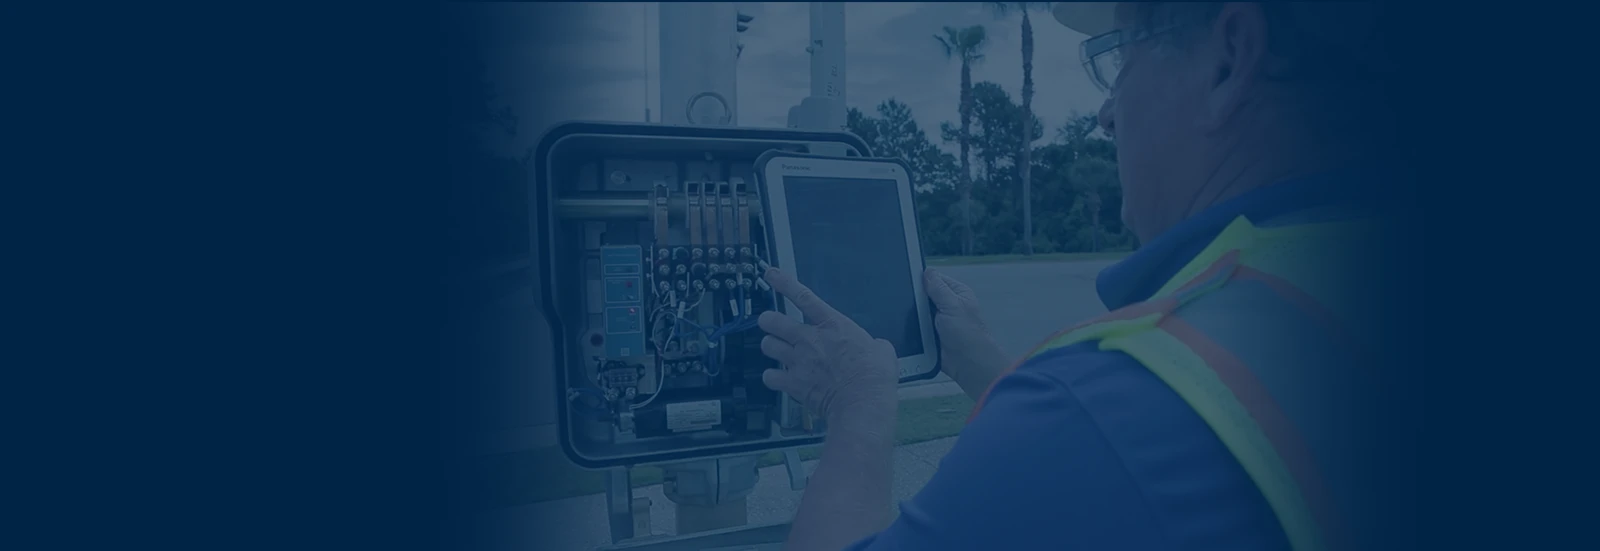 Utility technician taking photo with tablet device